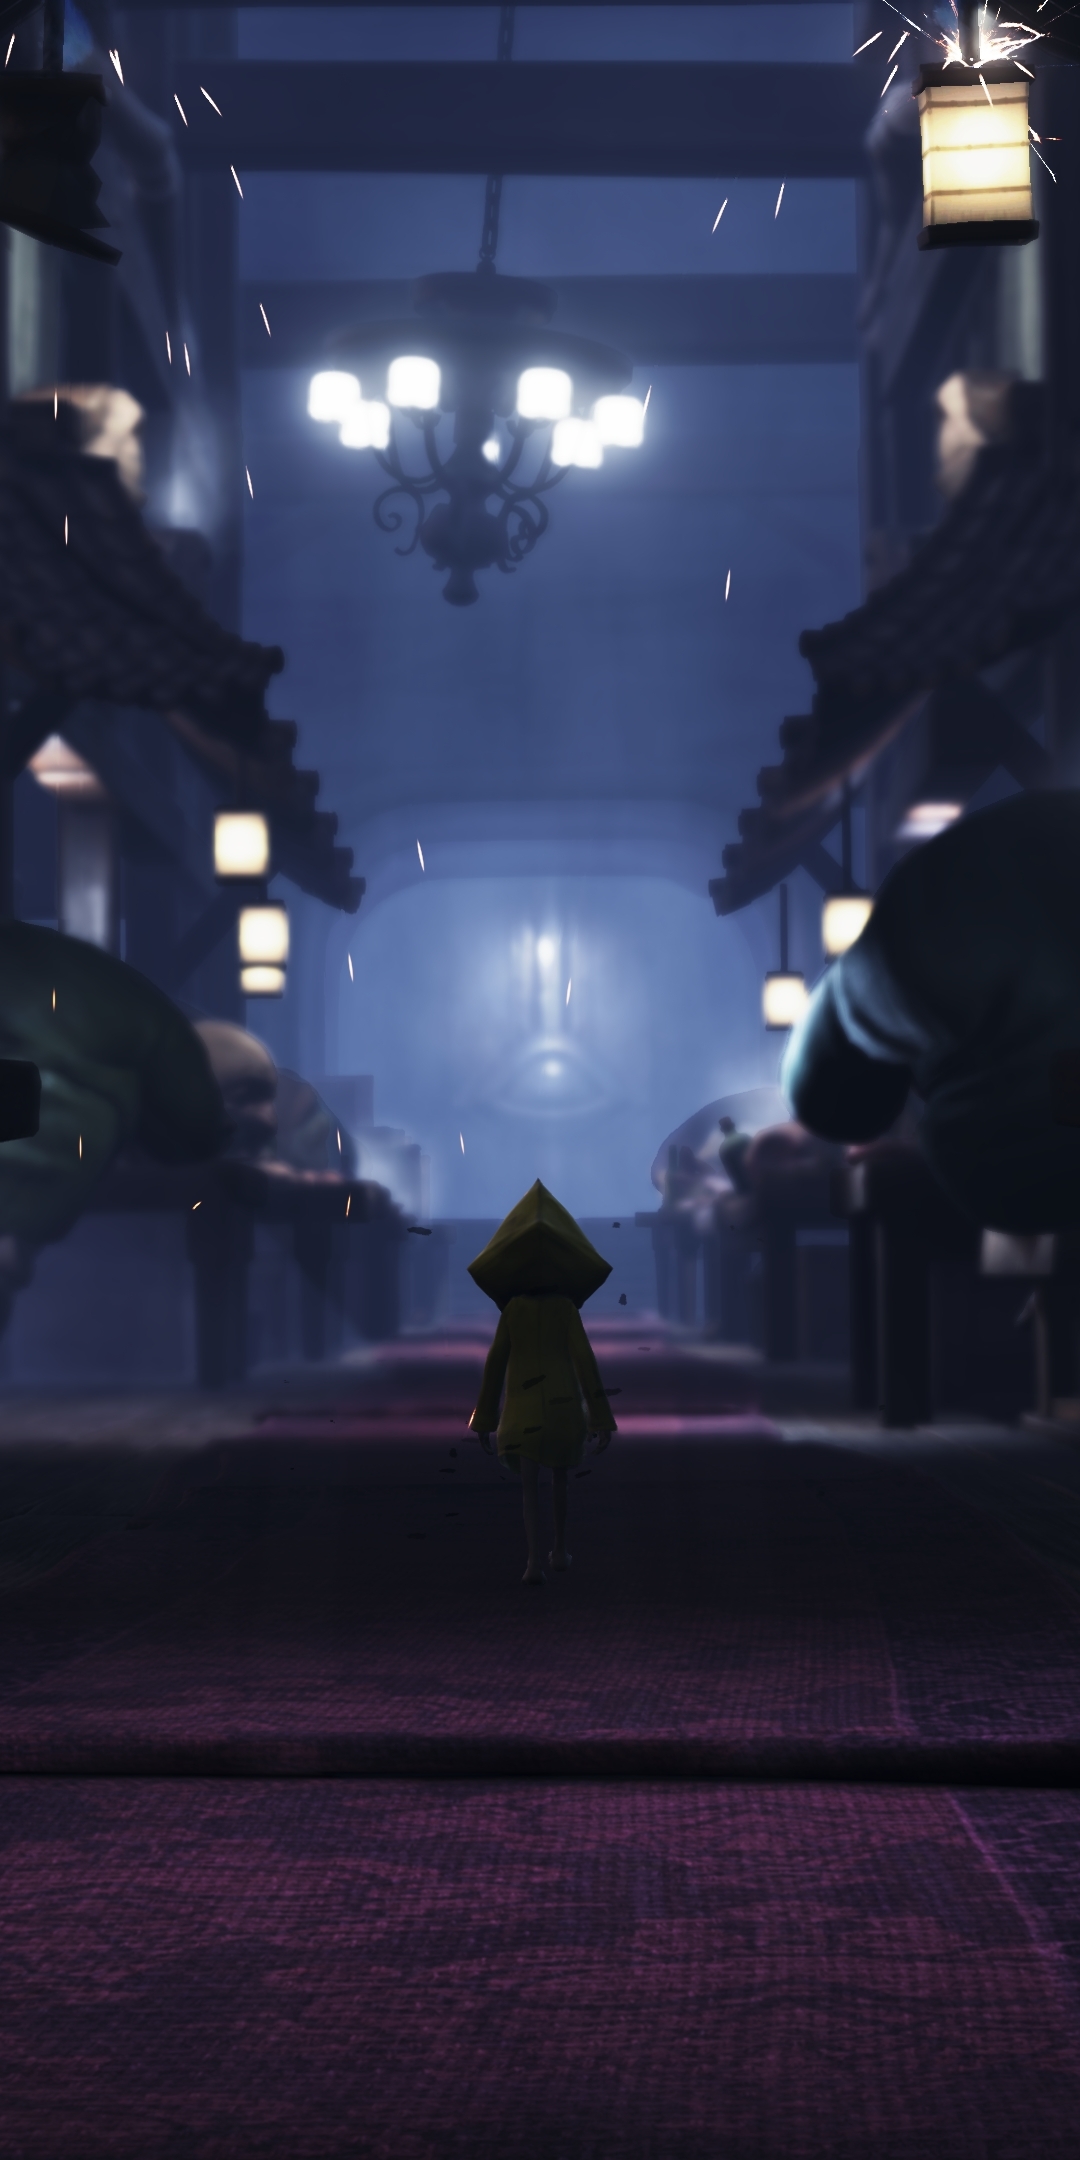 Little Nightmares II On Mobile: How To Download Little Nightmares 2 On  Android & iOS